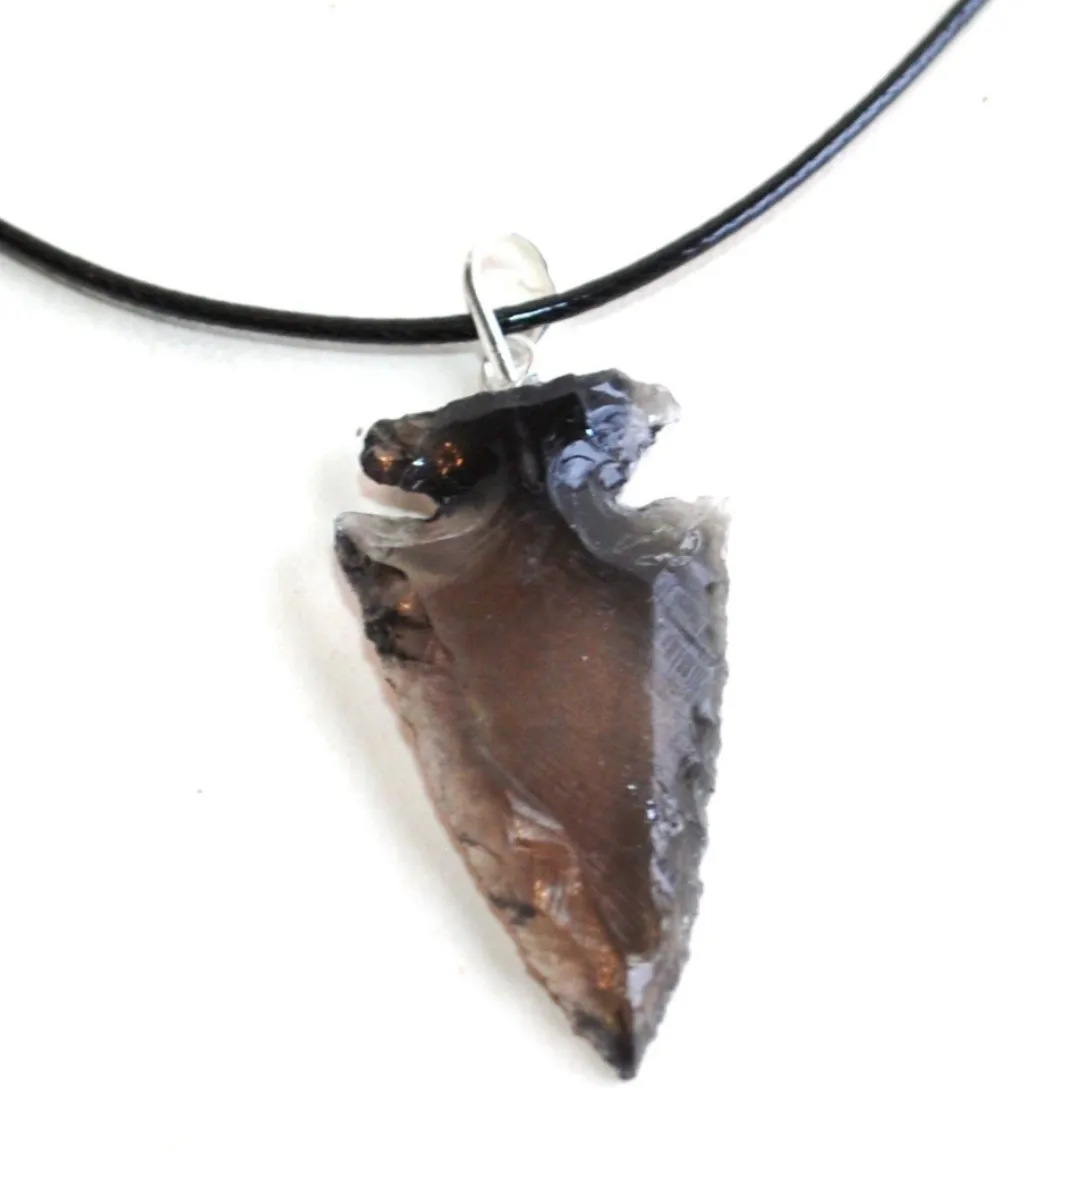 Quality Assured Natural Gemstone Black Obsidian Arrowhead Necklace Stone Craft Arrowhead Pendent Necklace Supply